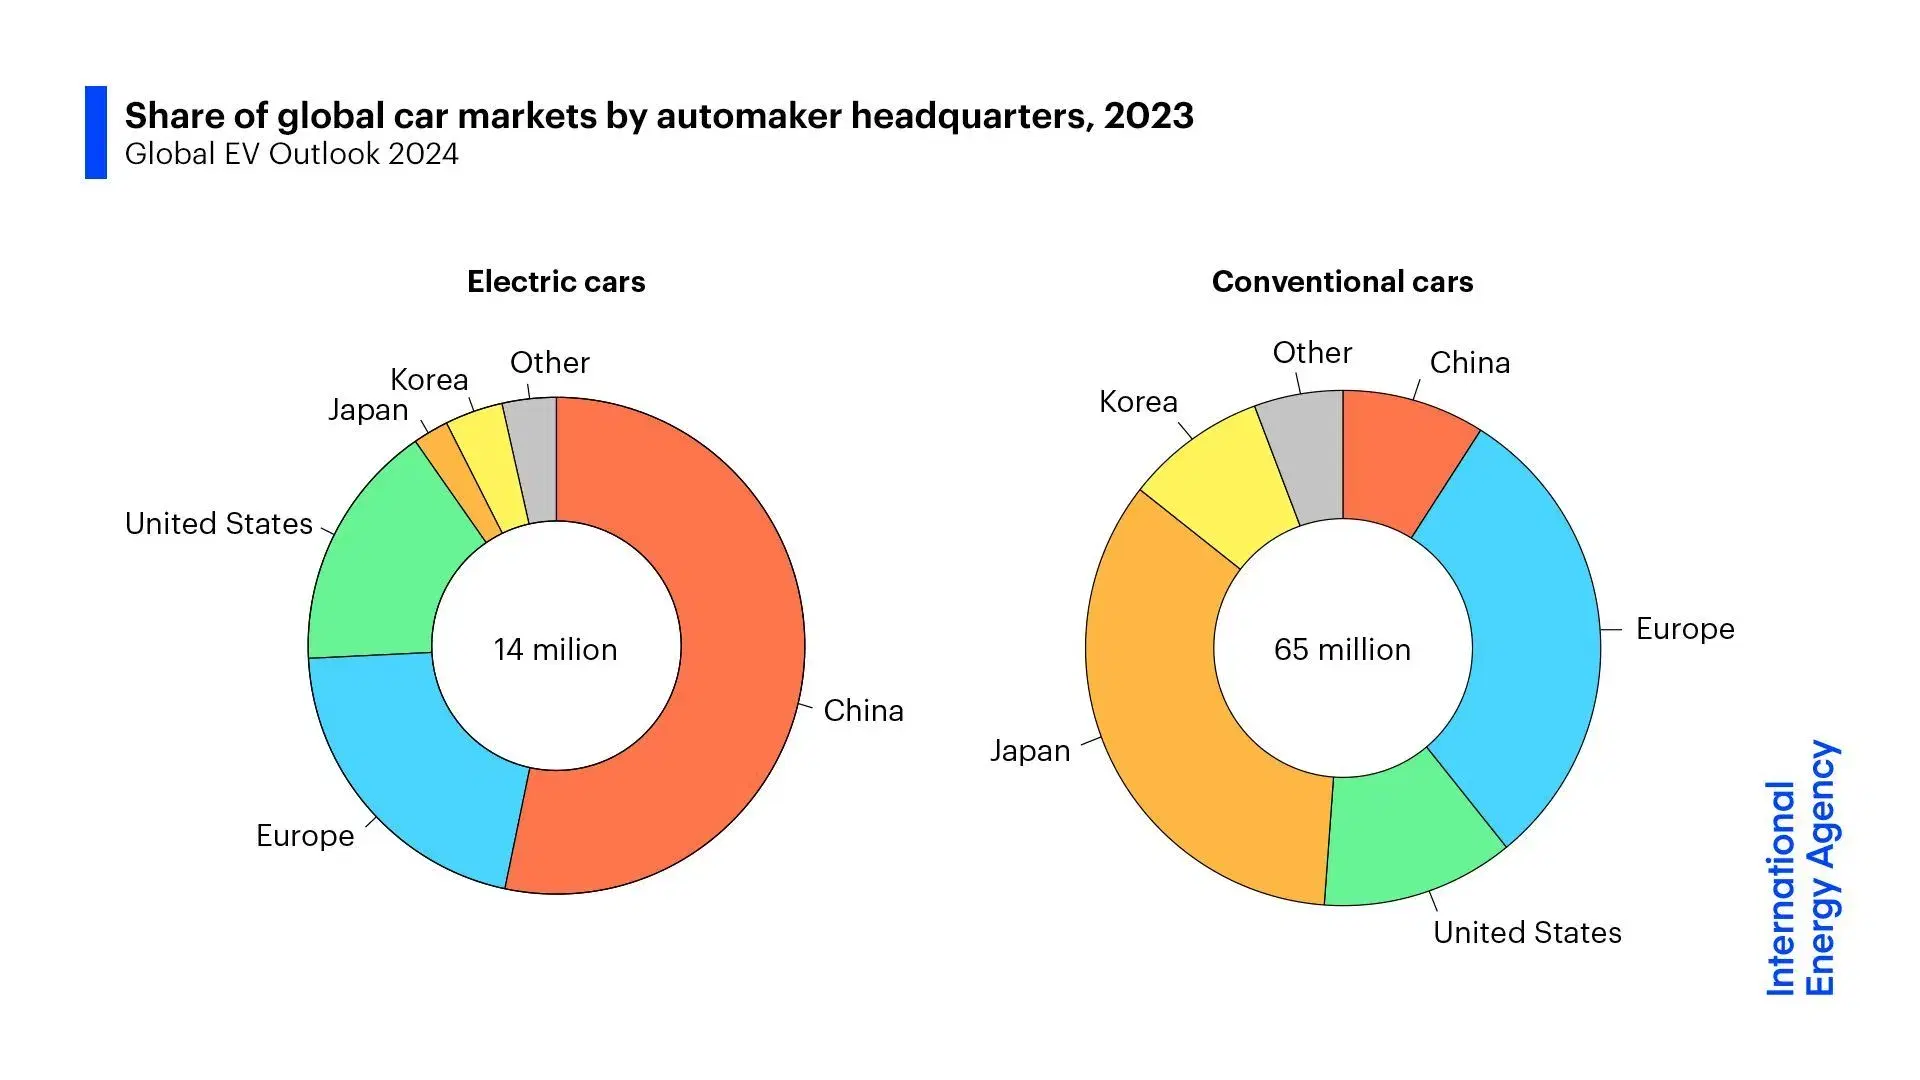 Share of Global Car Markets by Automaker Headquarters